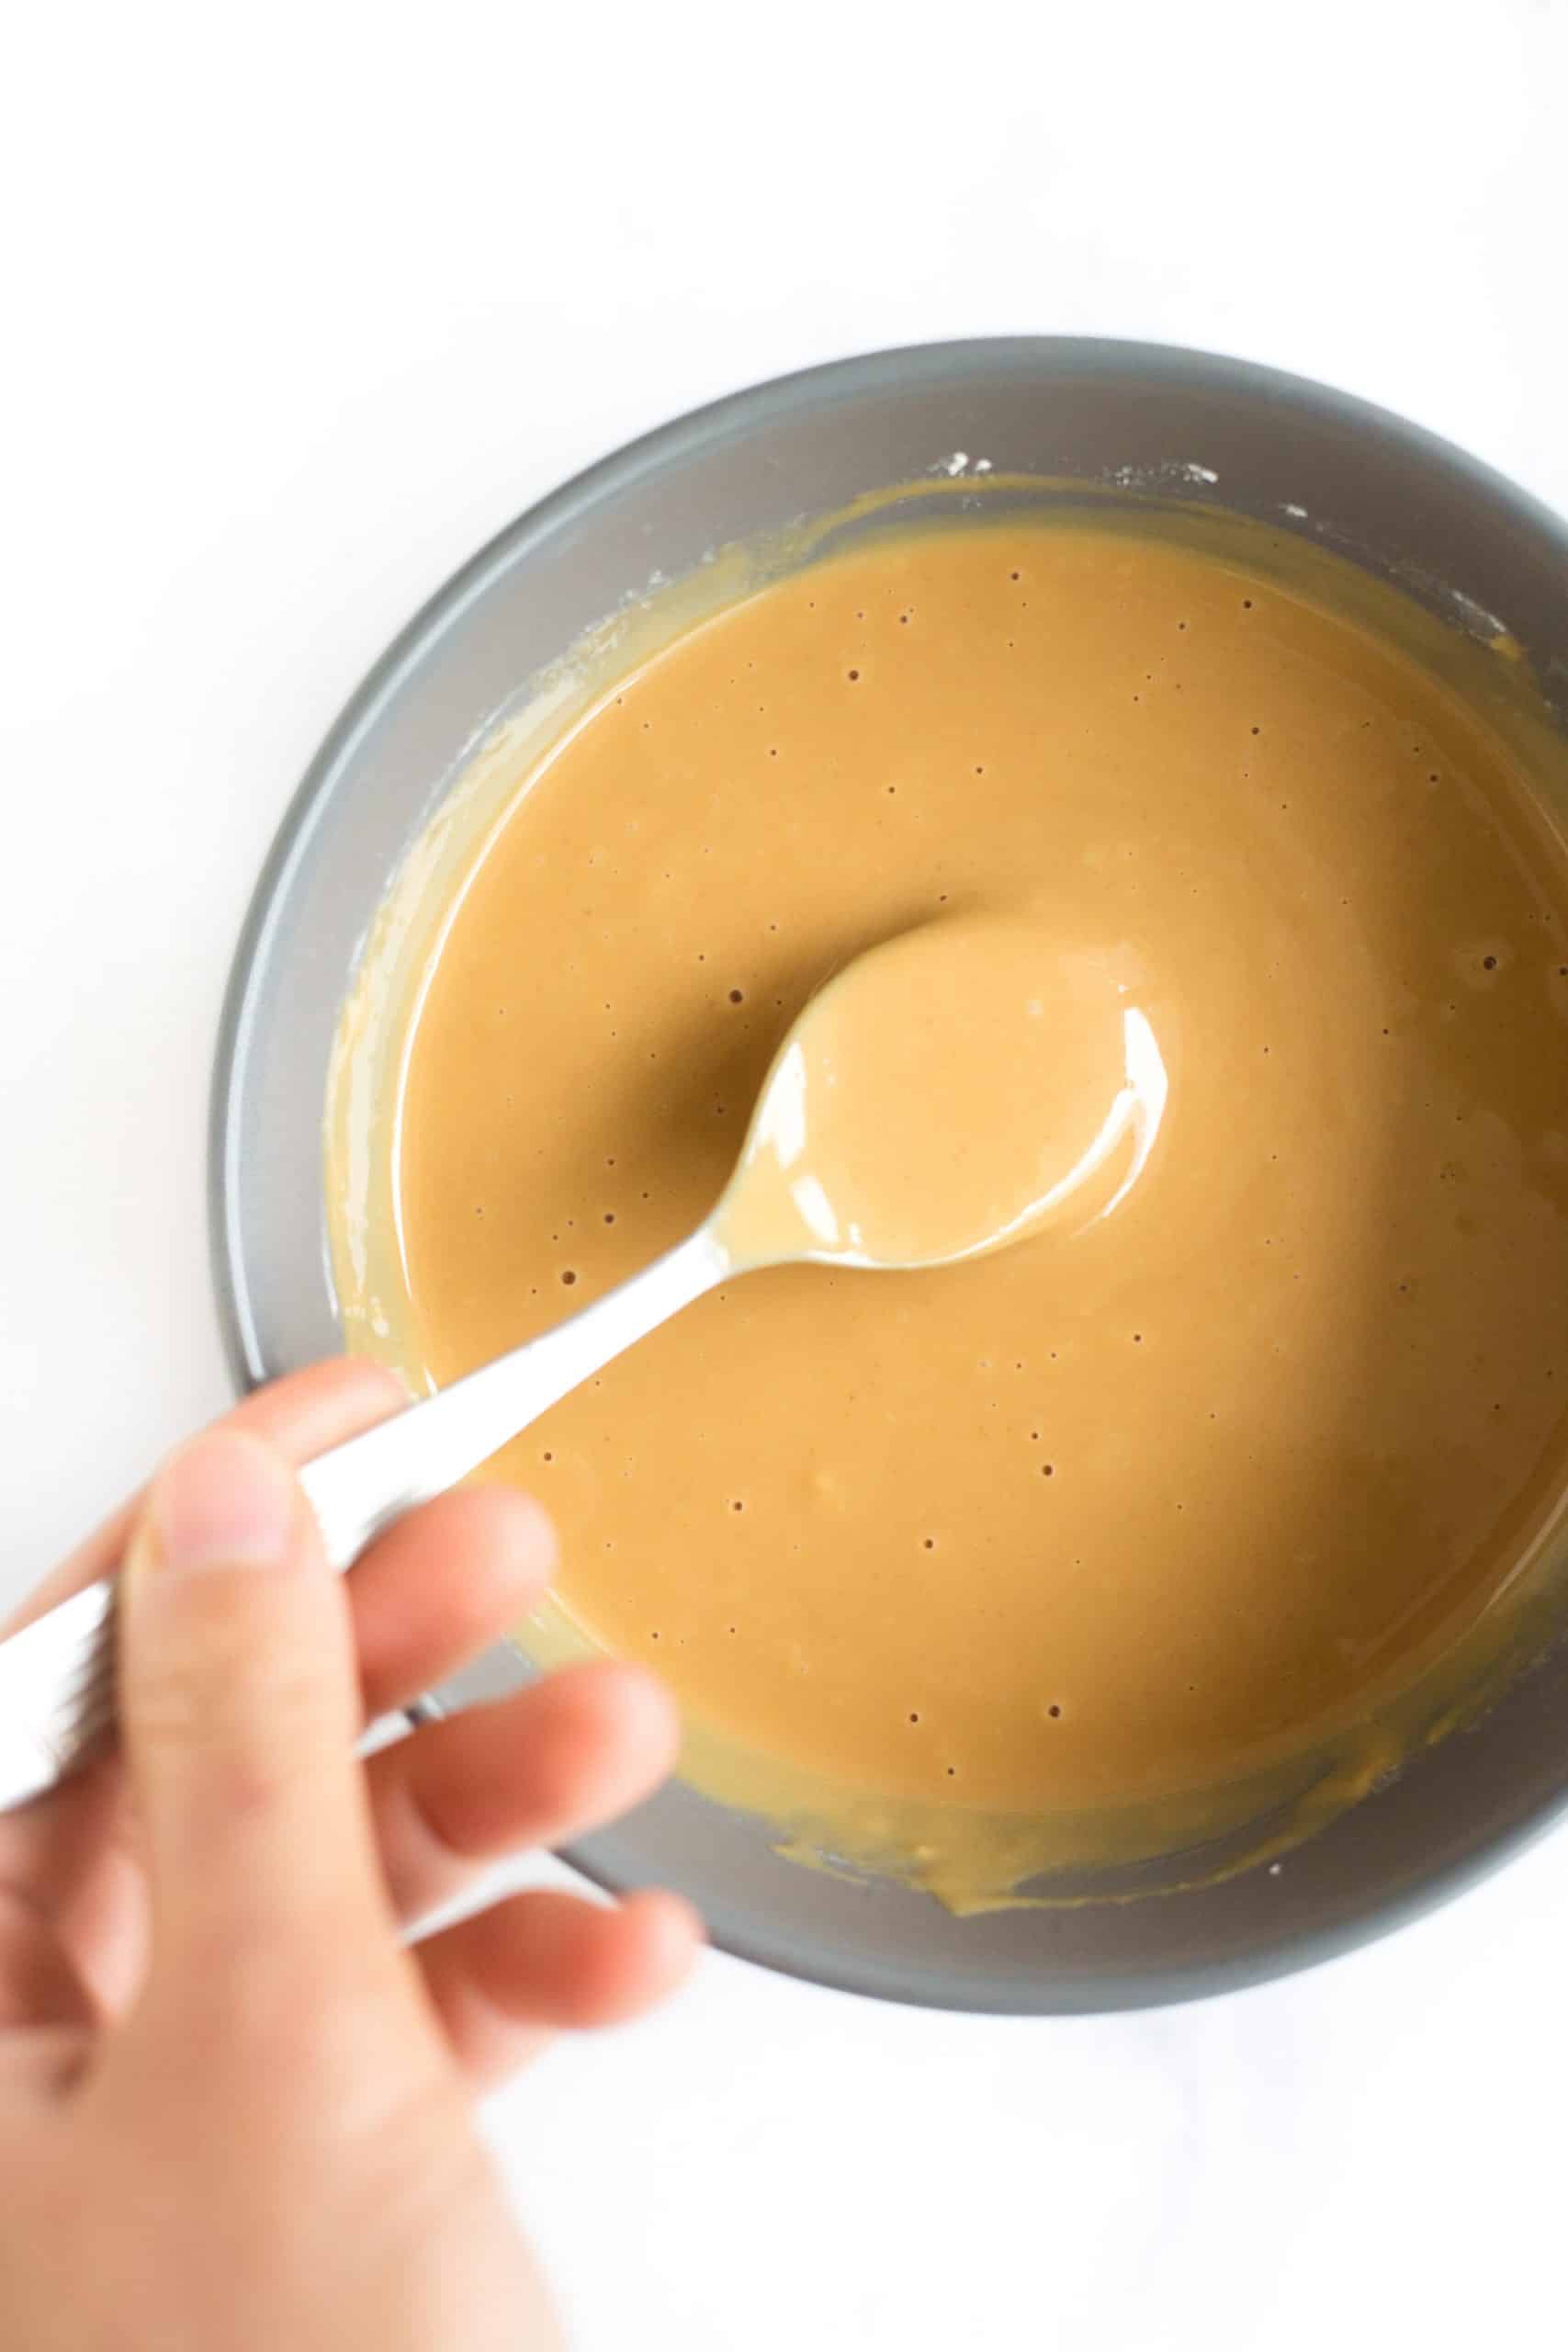 Mixing peanut butter mixture in a grey bowl.